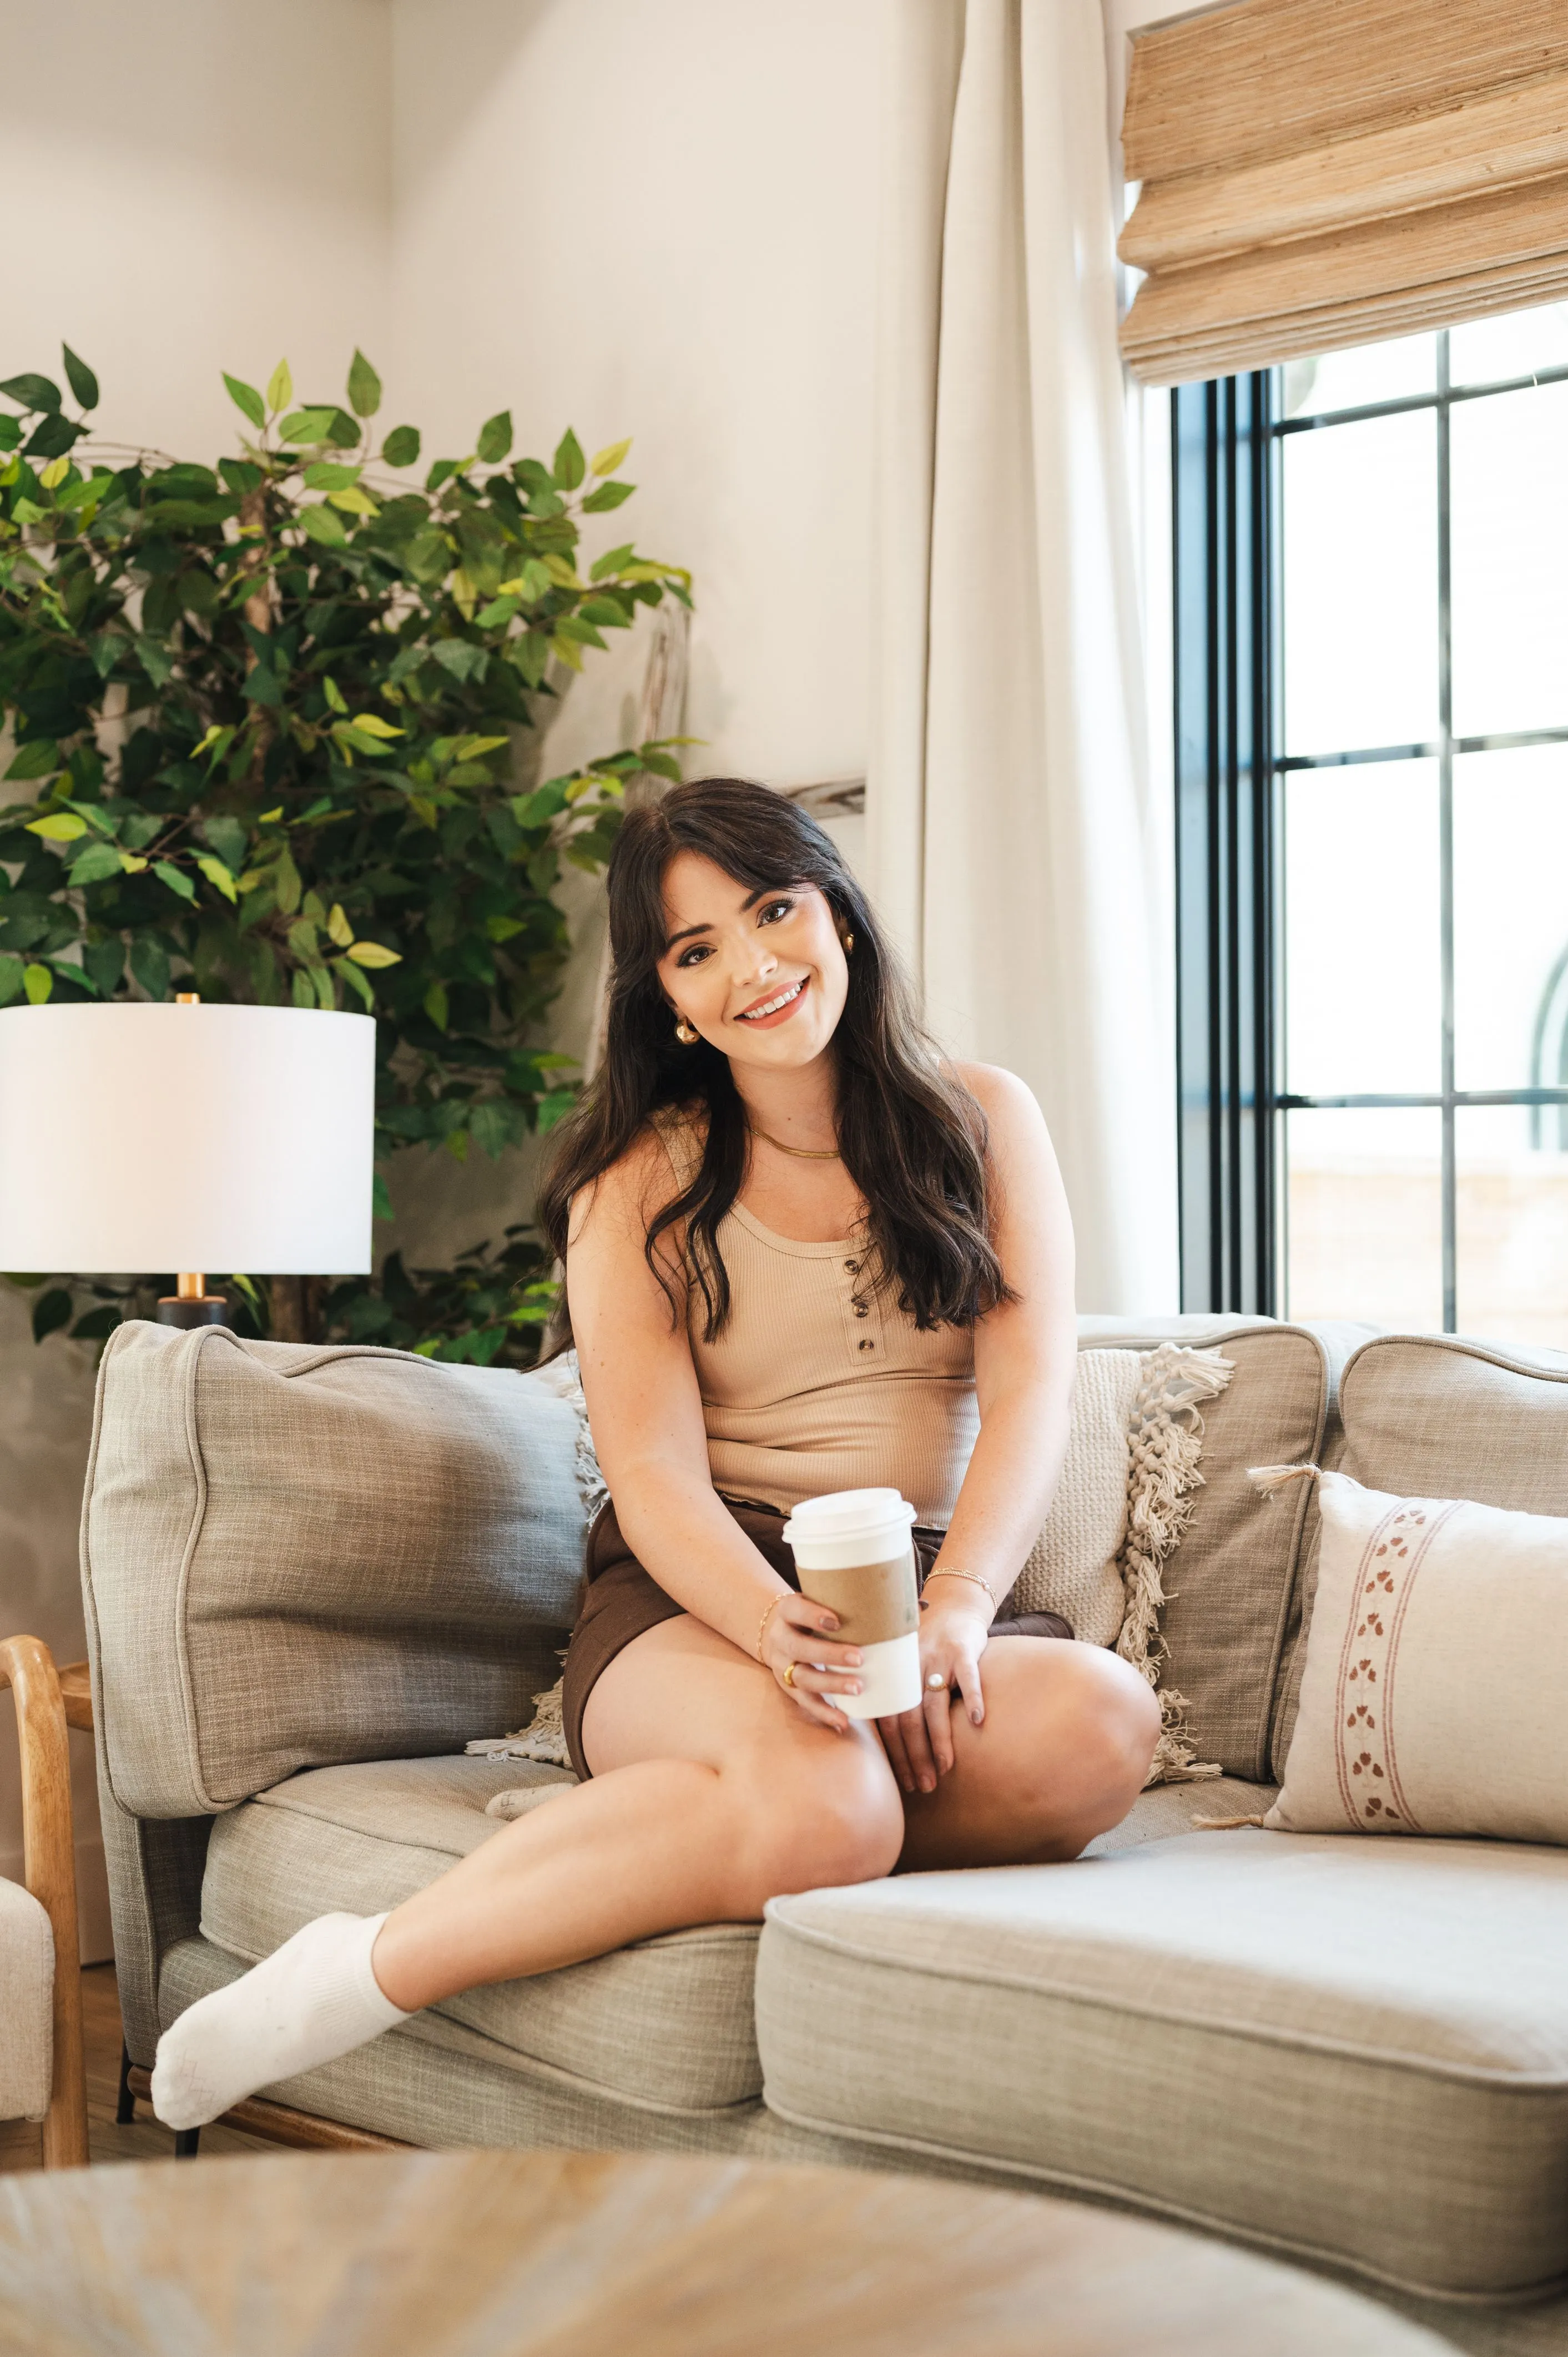 Woman smiling on a sofa holding a coffee cup with indoor plants and natural light in the background.